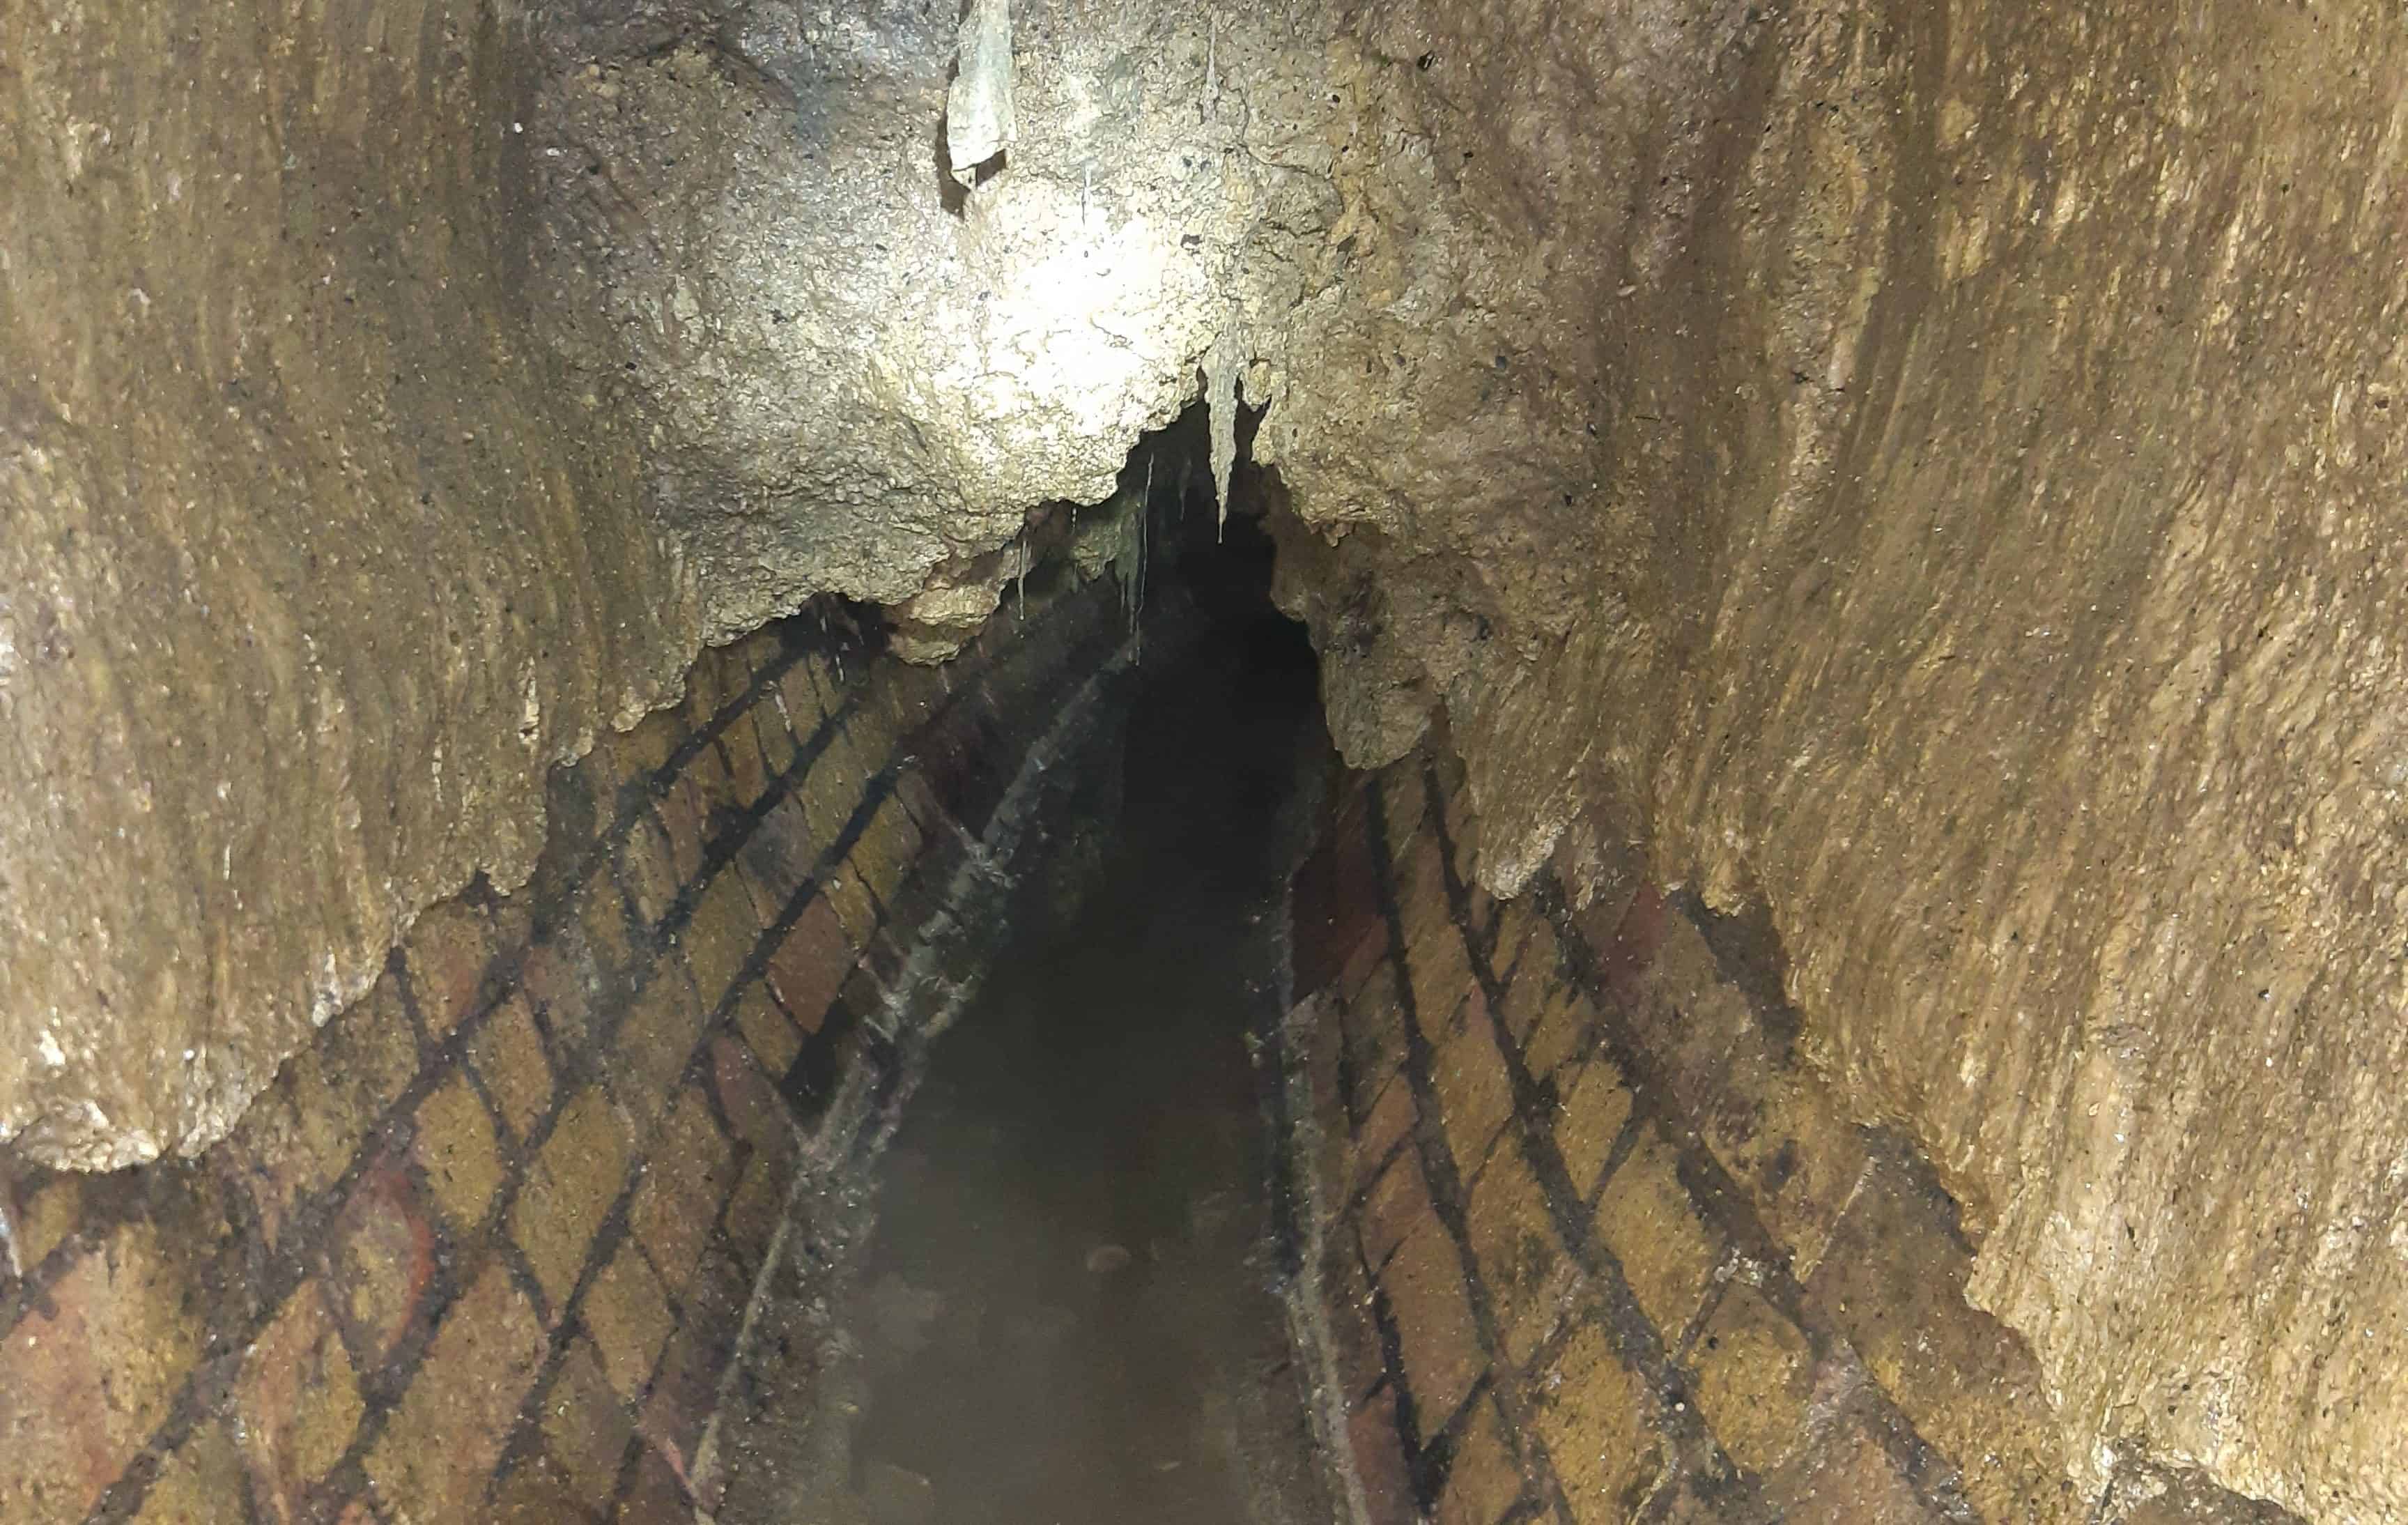 The fatberg, discovered on Cathedral Street underneath Borough Market